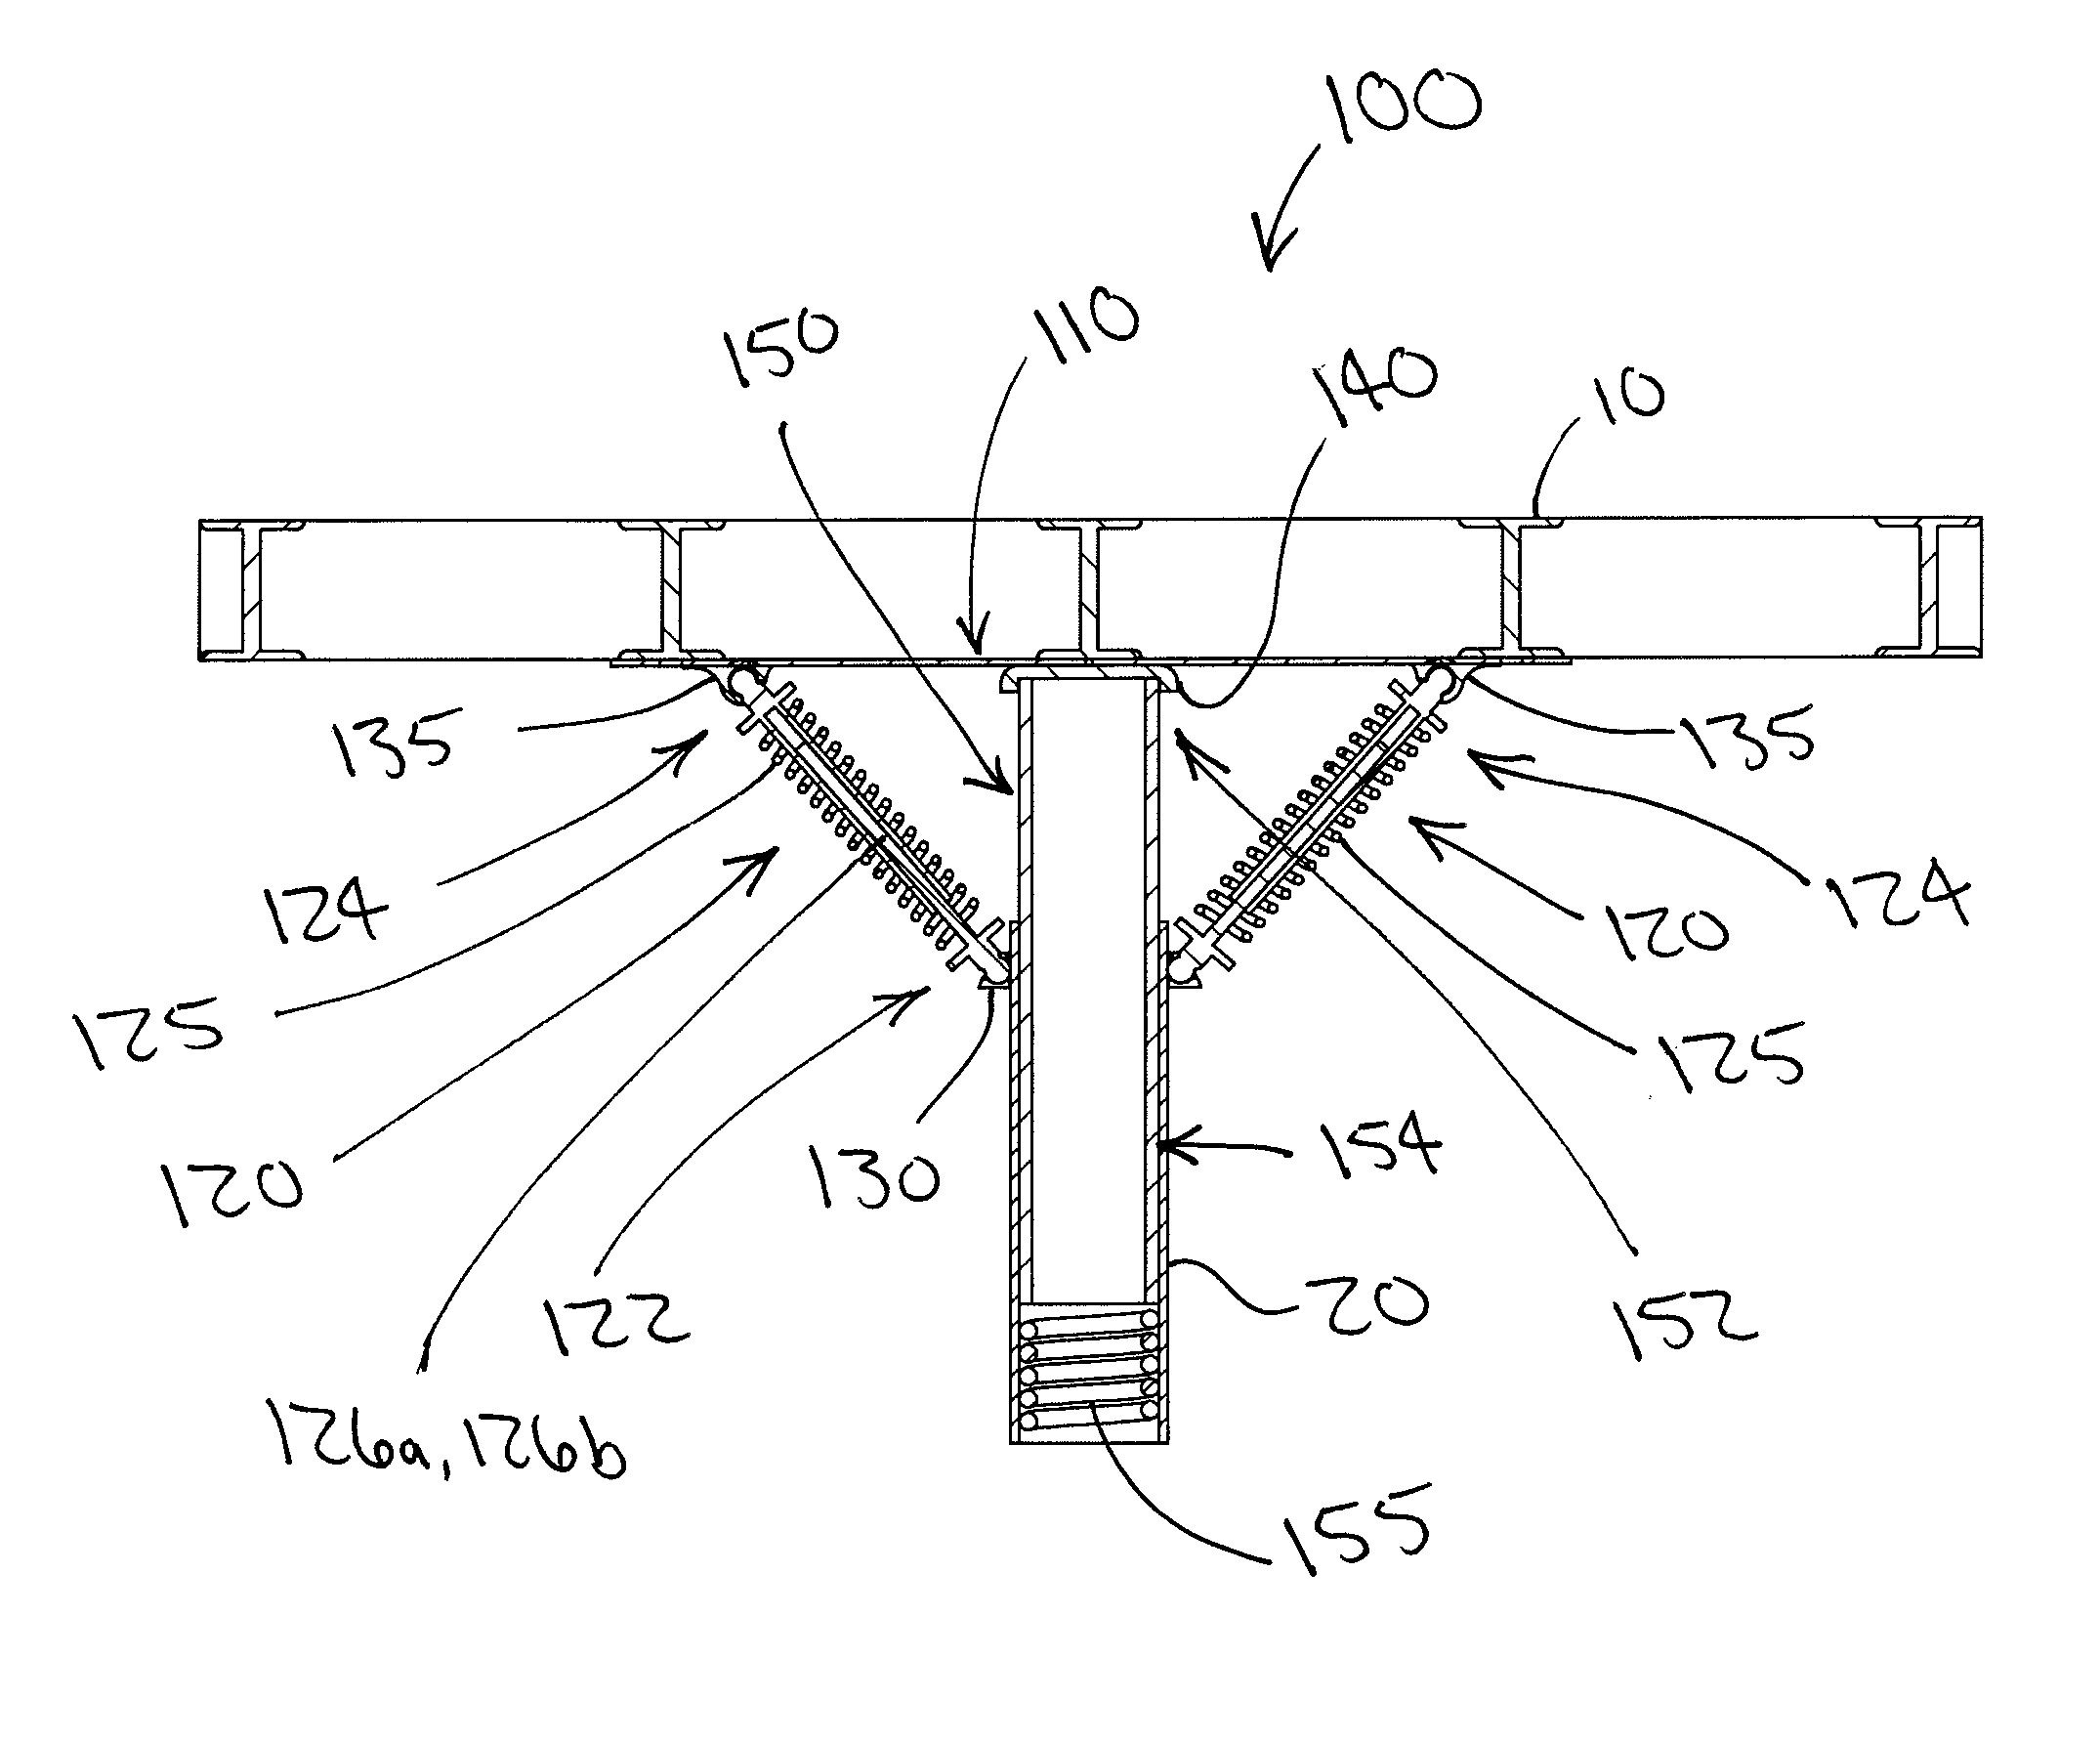 Pylon Attachment Device and Flooring System Utilizing Same